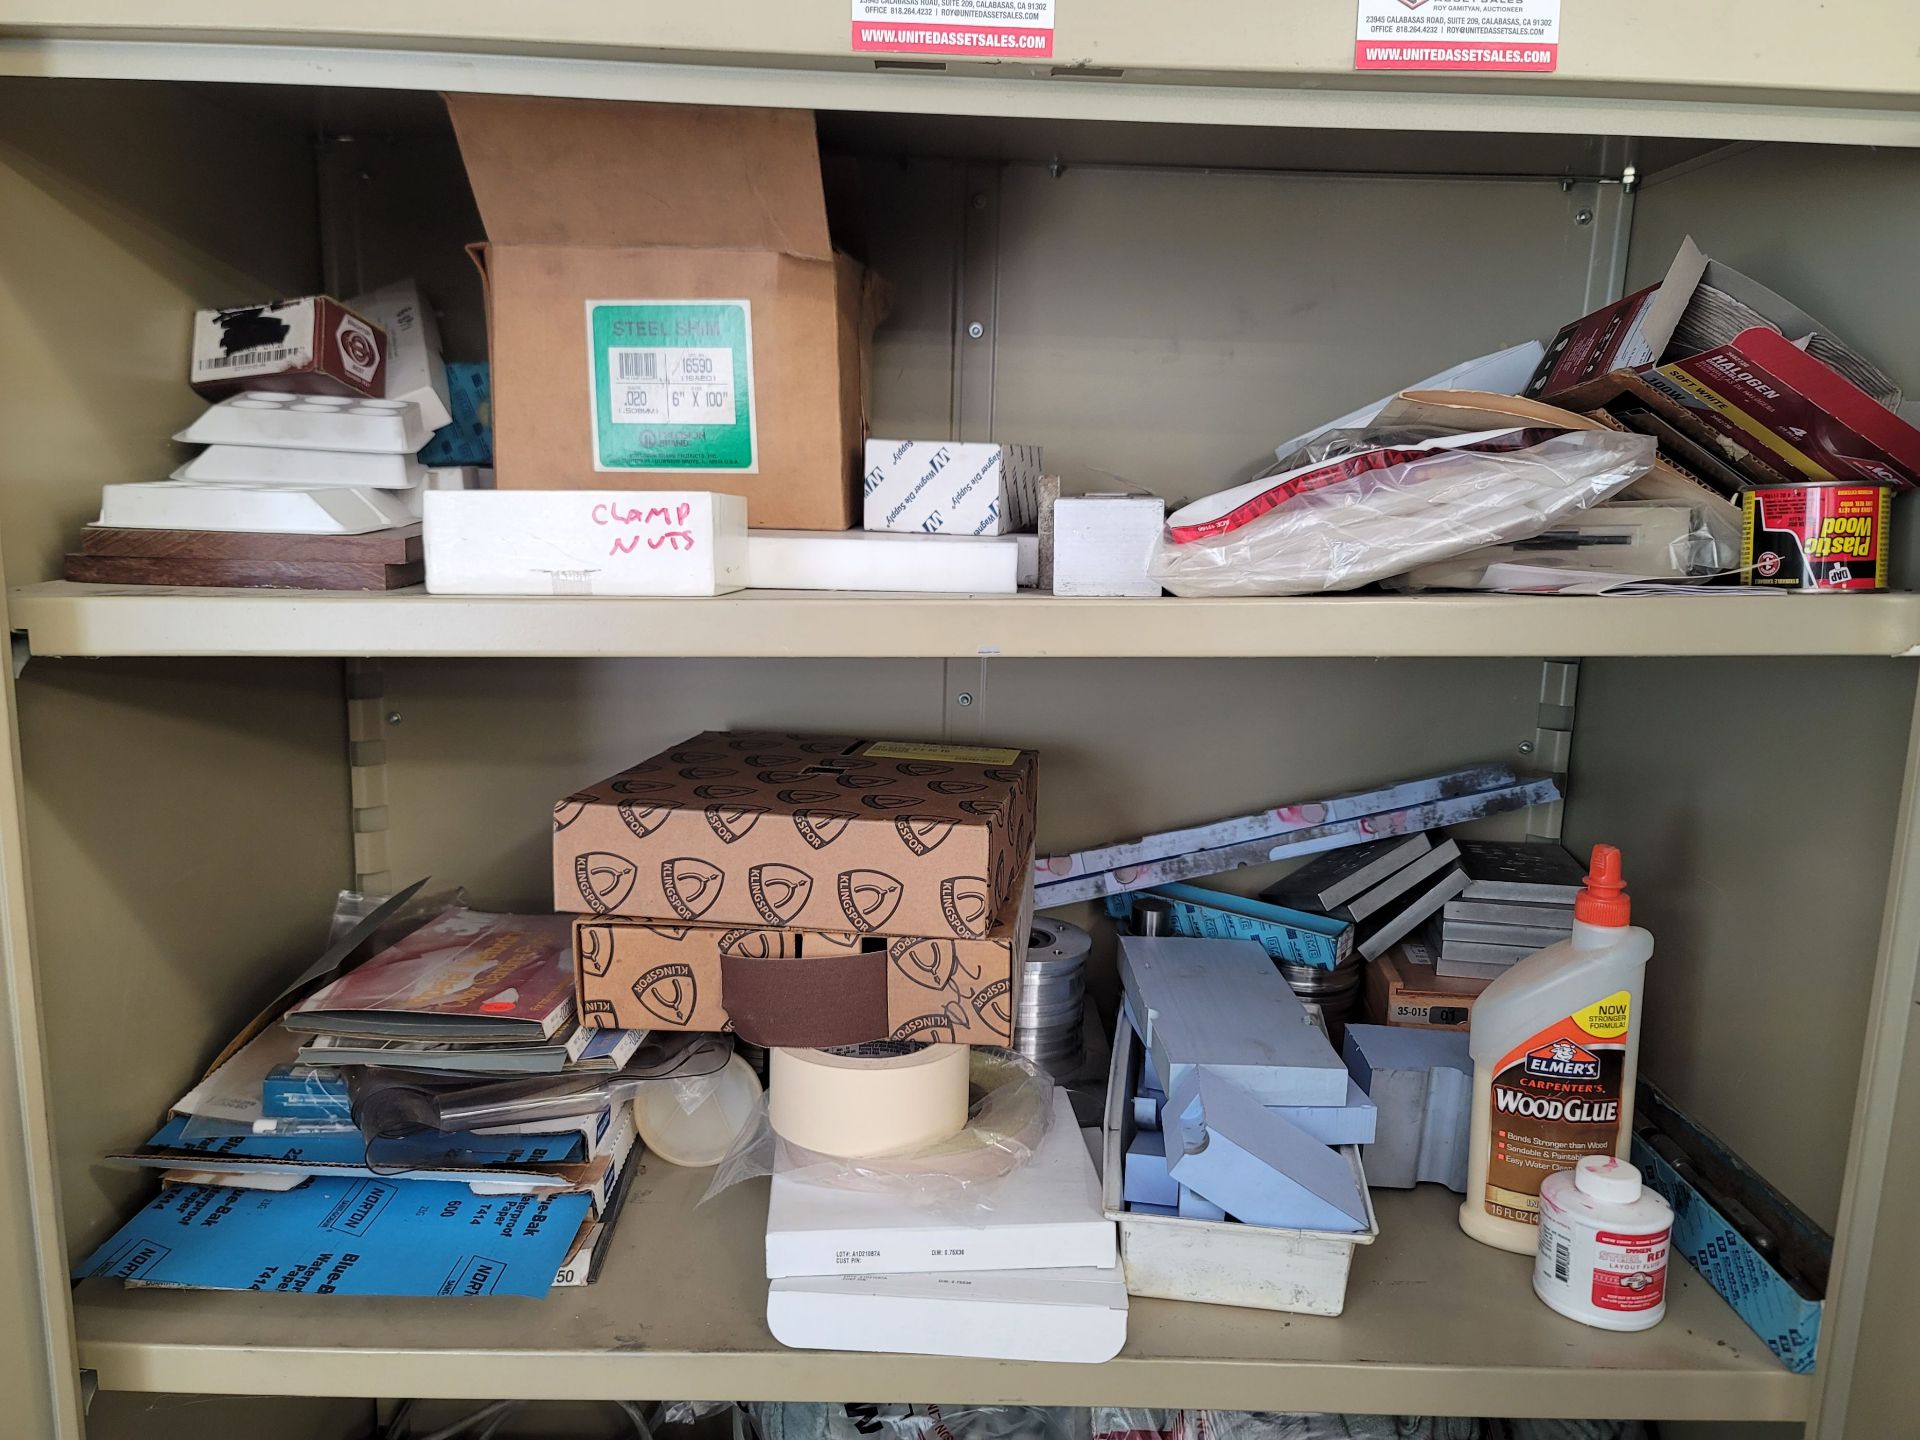 LOT - CONTENTS ONLY OF CABINET, TO INCLUDE: SAND PAPER, TAPE, MOLD PREP, SHOP RAGS, ACETONE, SCRAP - Image 2 of 4